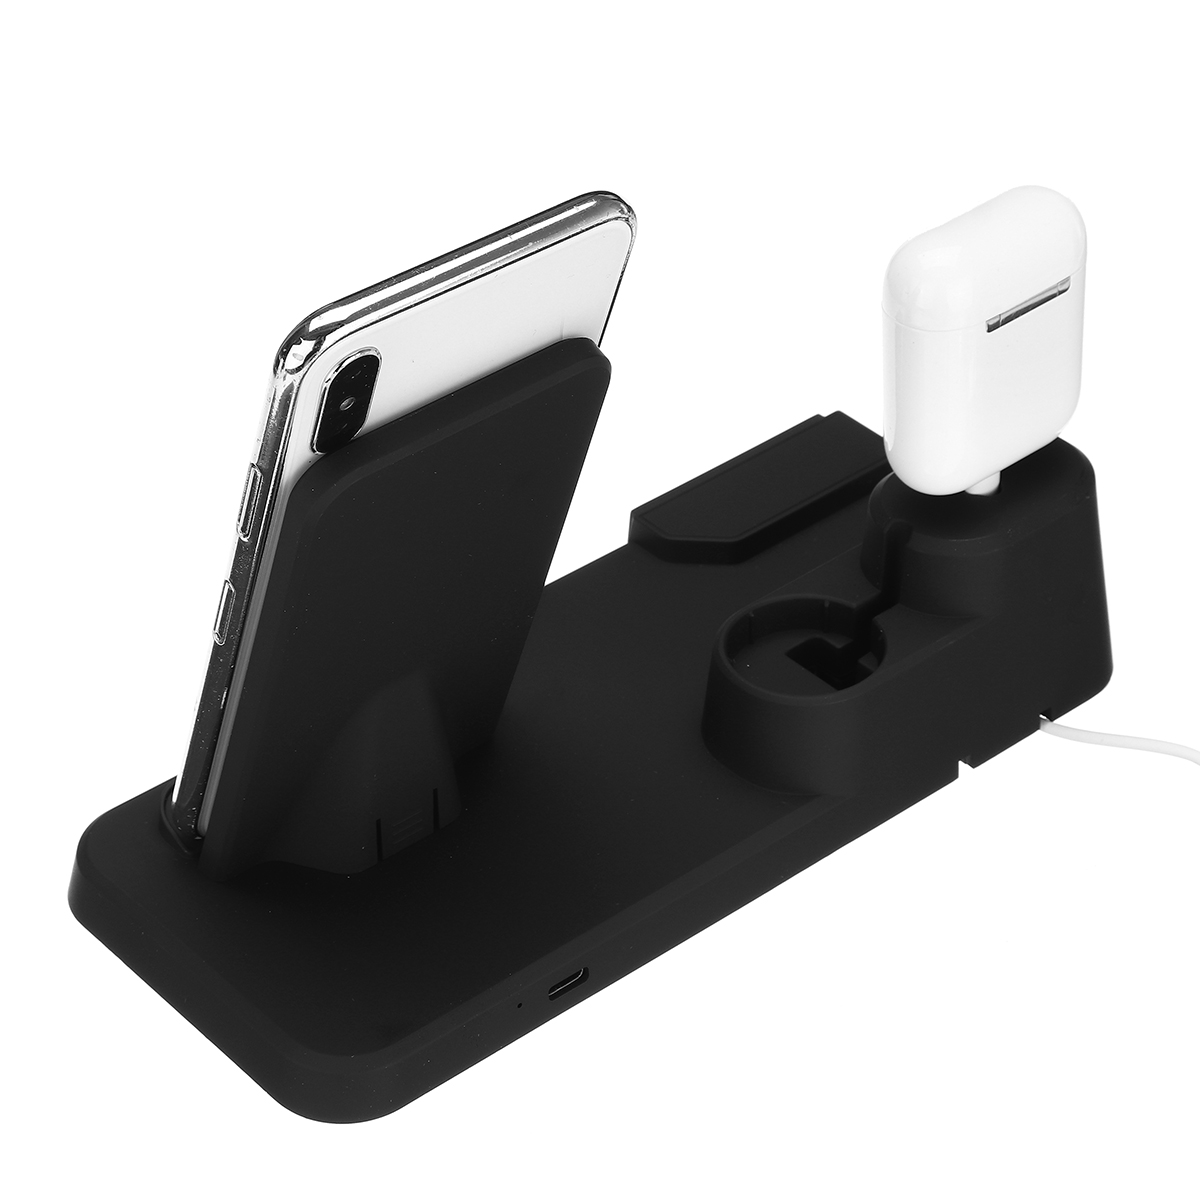 3-IN-1-Qi-Wireless-Charger-Charging-Stand-Dock-Mobile-Phone-Holder-Stand-for-iPhone-Airpods-iWatch-1790259-11